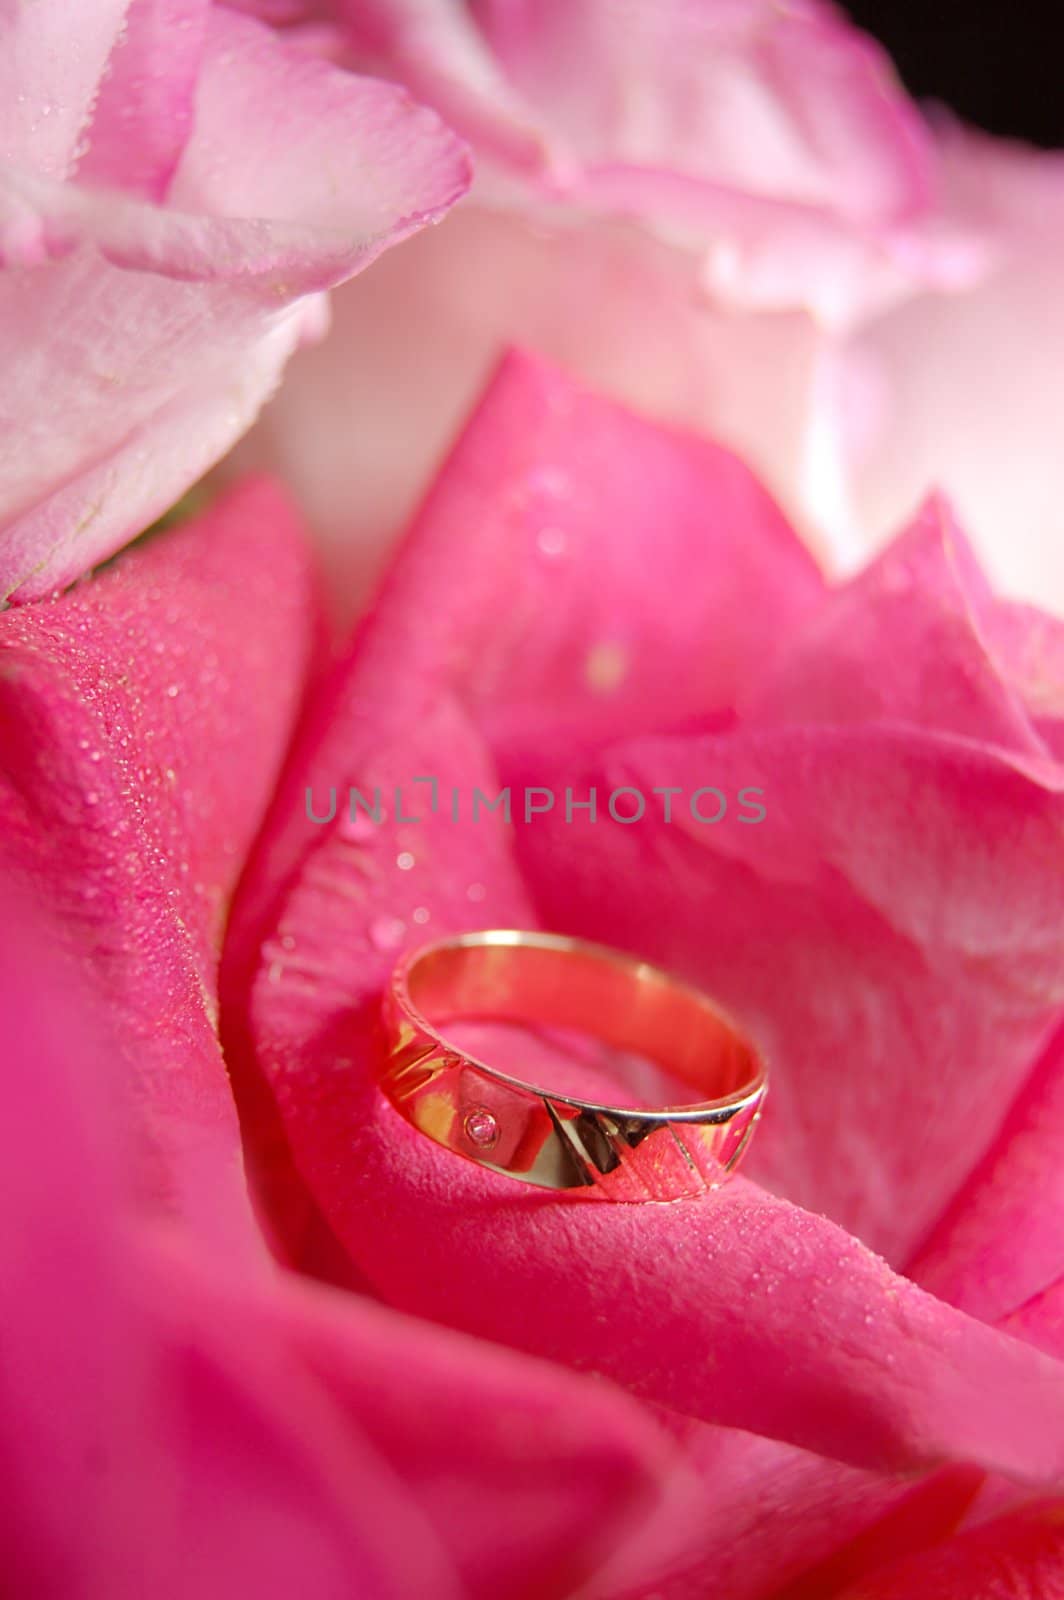 rose and wedding ring on pink